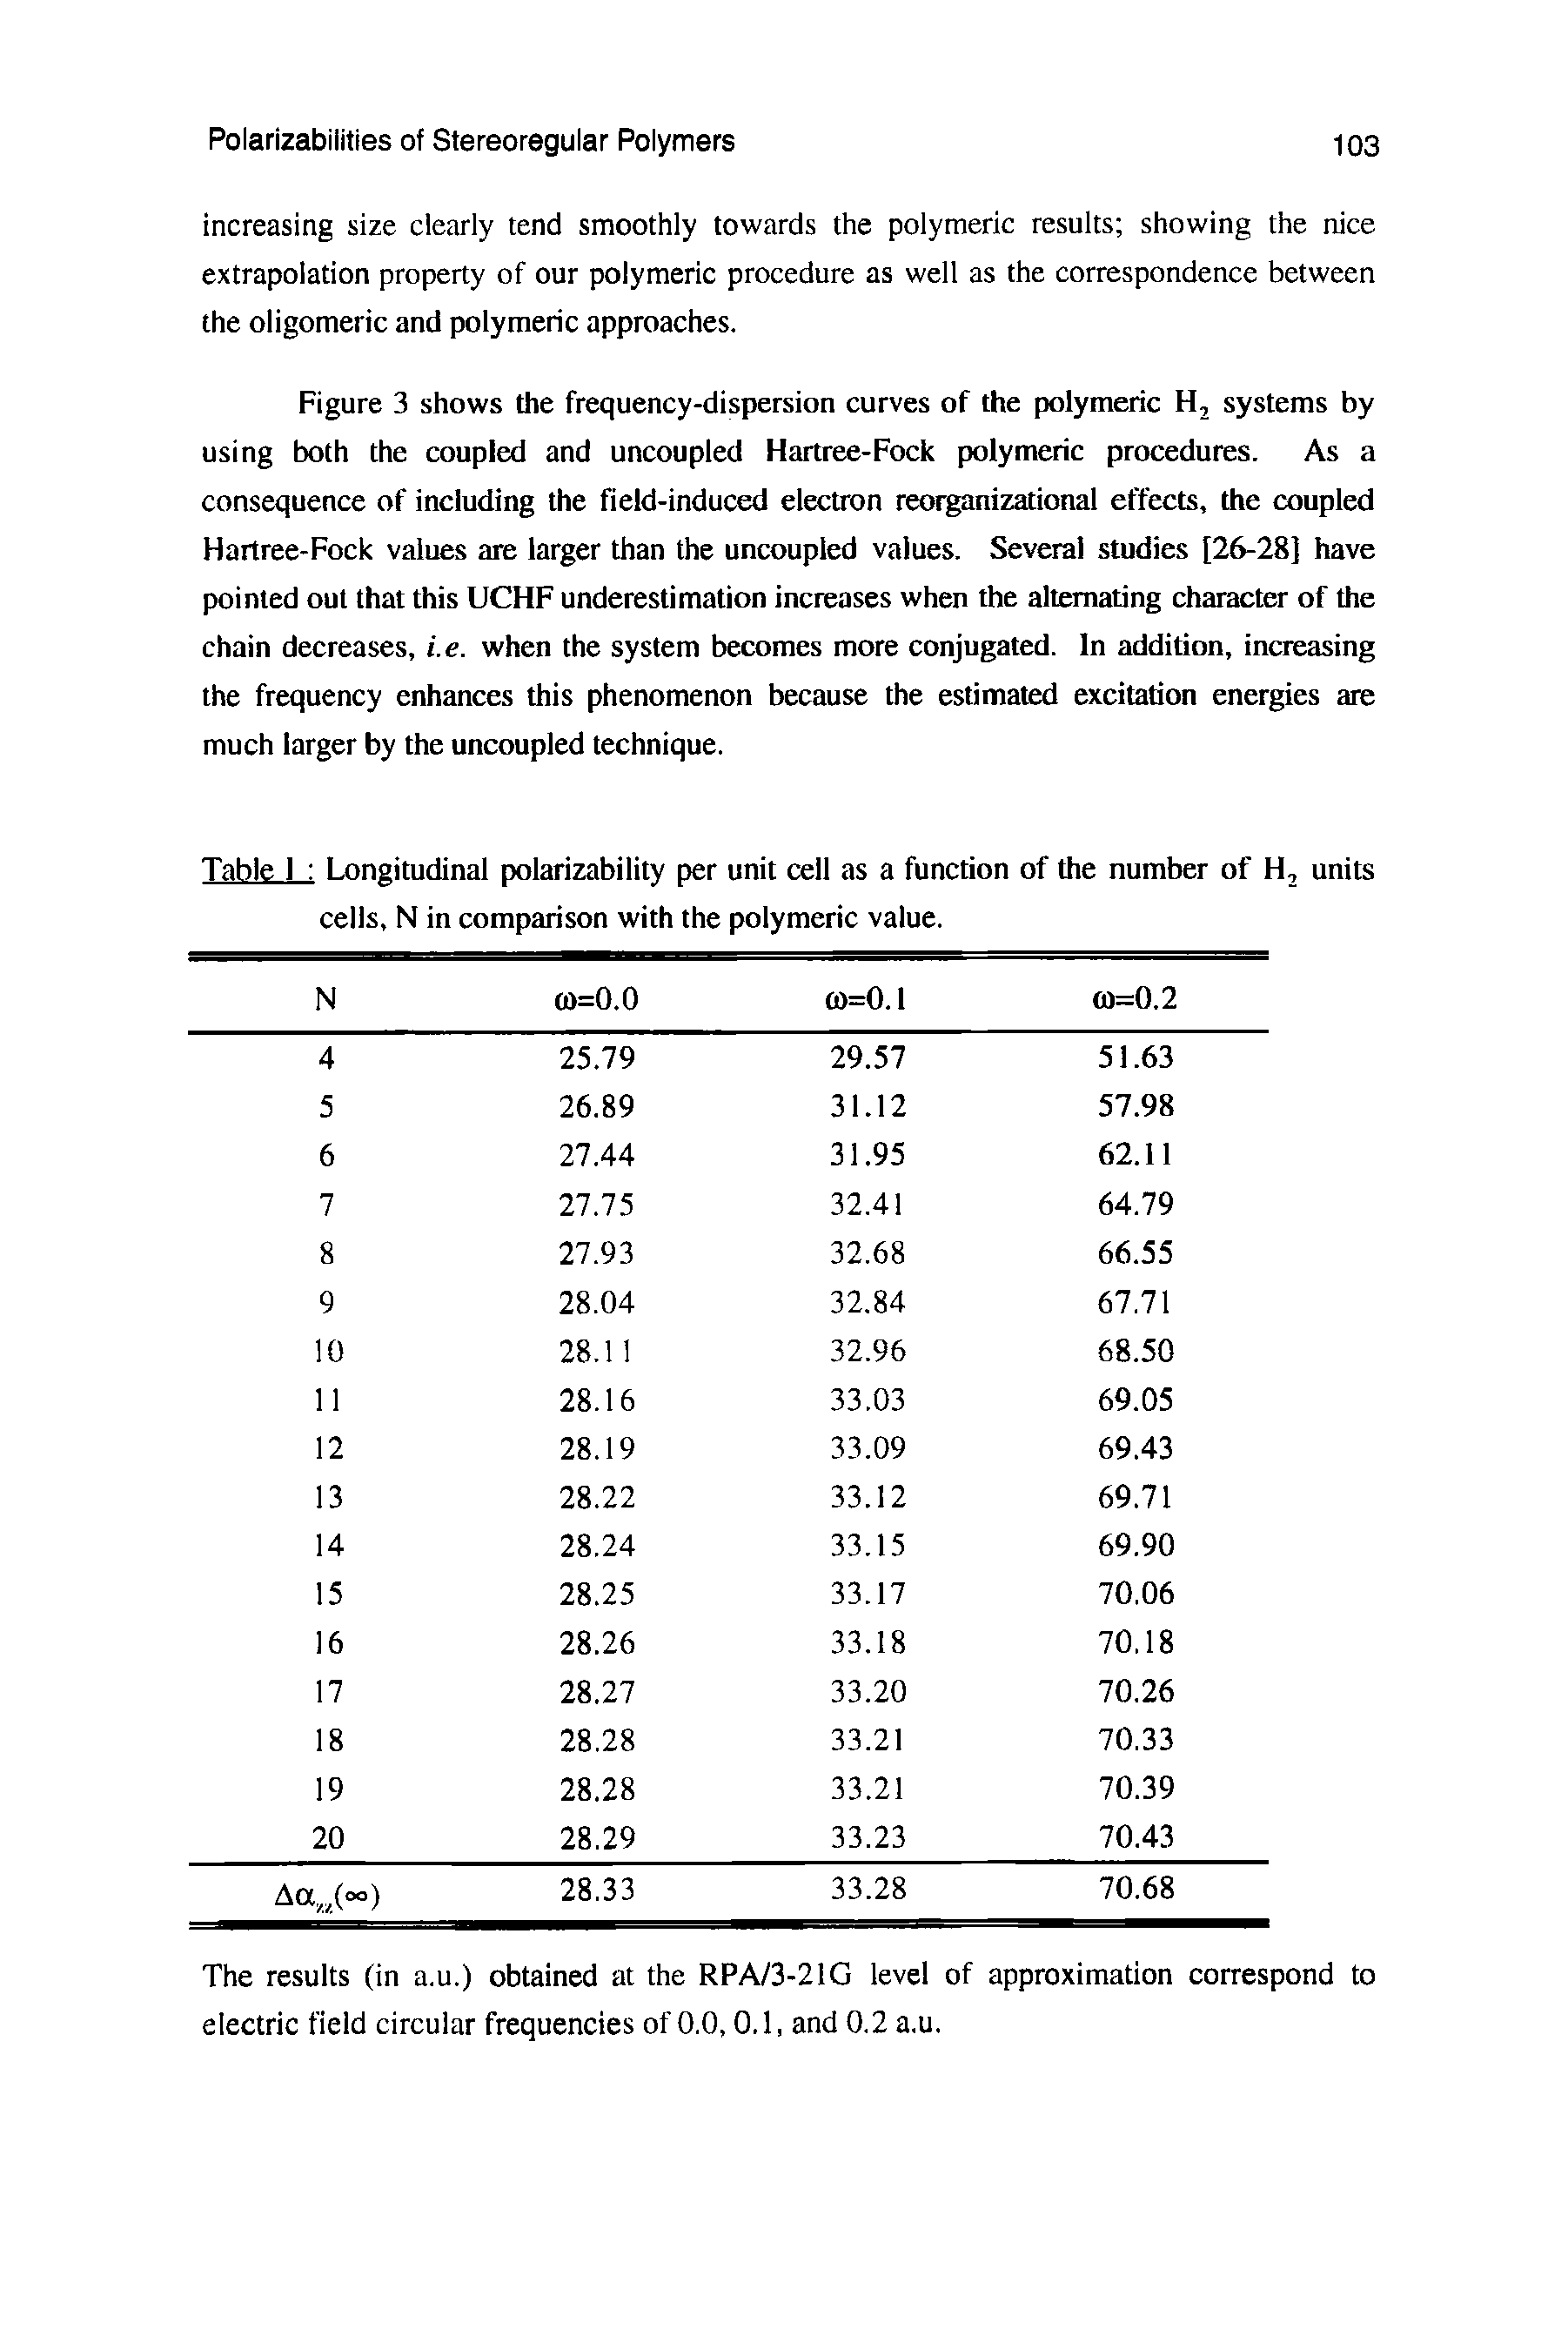 Table I Longitudinal polarizability per unit cell as a function of the number of H, units cells, N in comparison with the polymeric value.